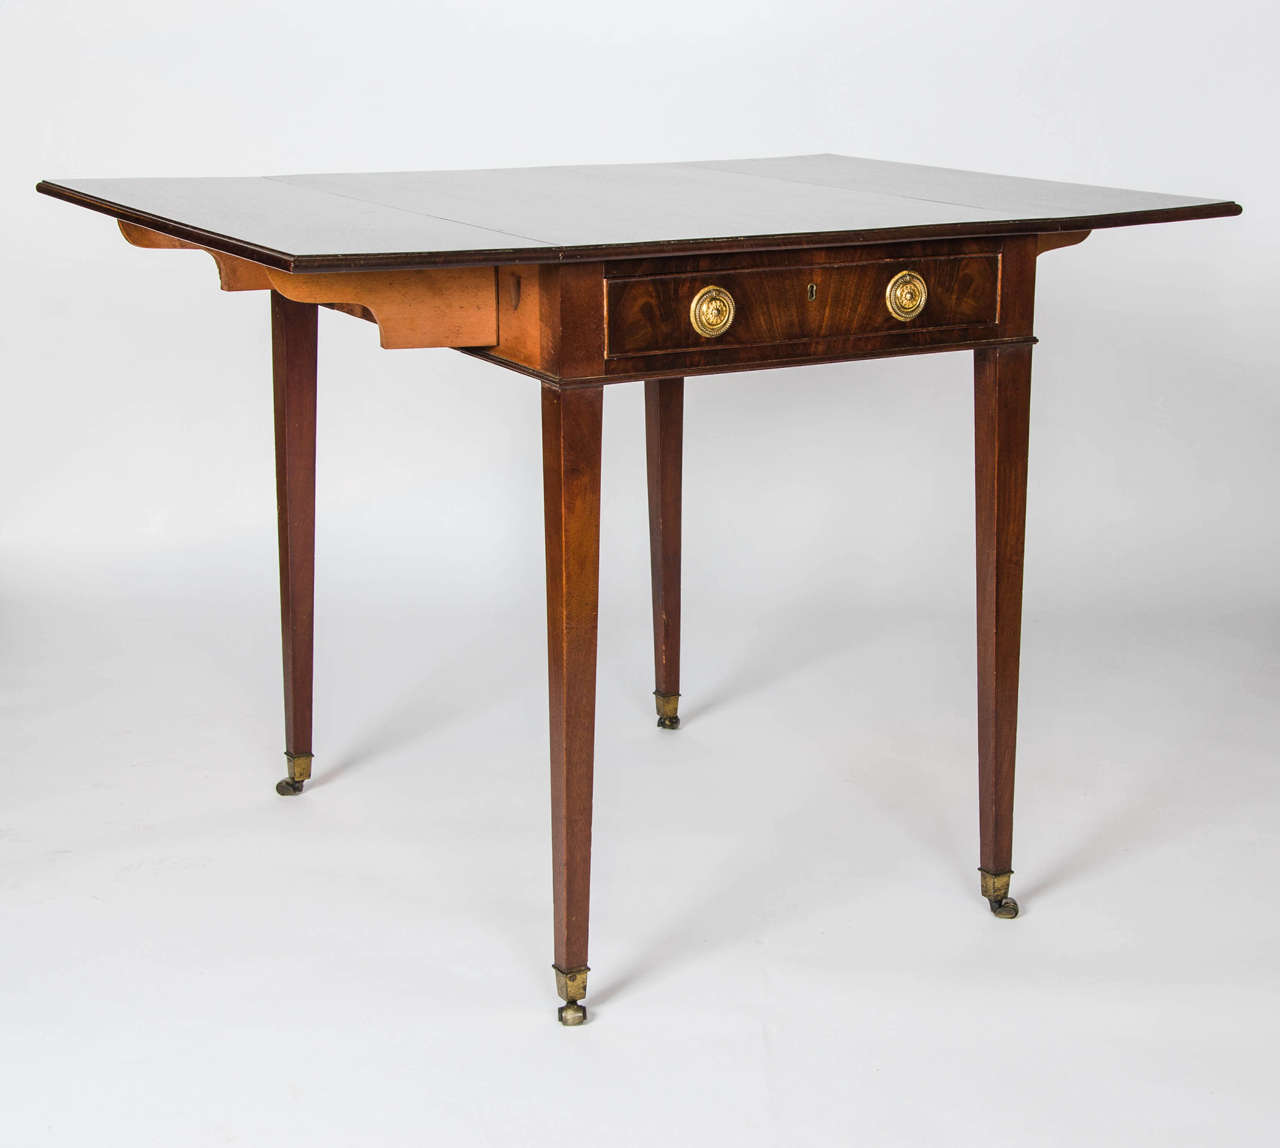 A fine George III period mahogany Pembroke table with single ling drawer, original handles standing on square tapering legs terminating in the original cap barrel castors.